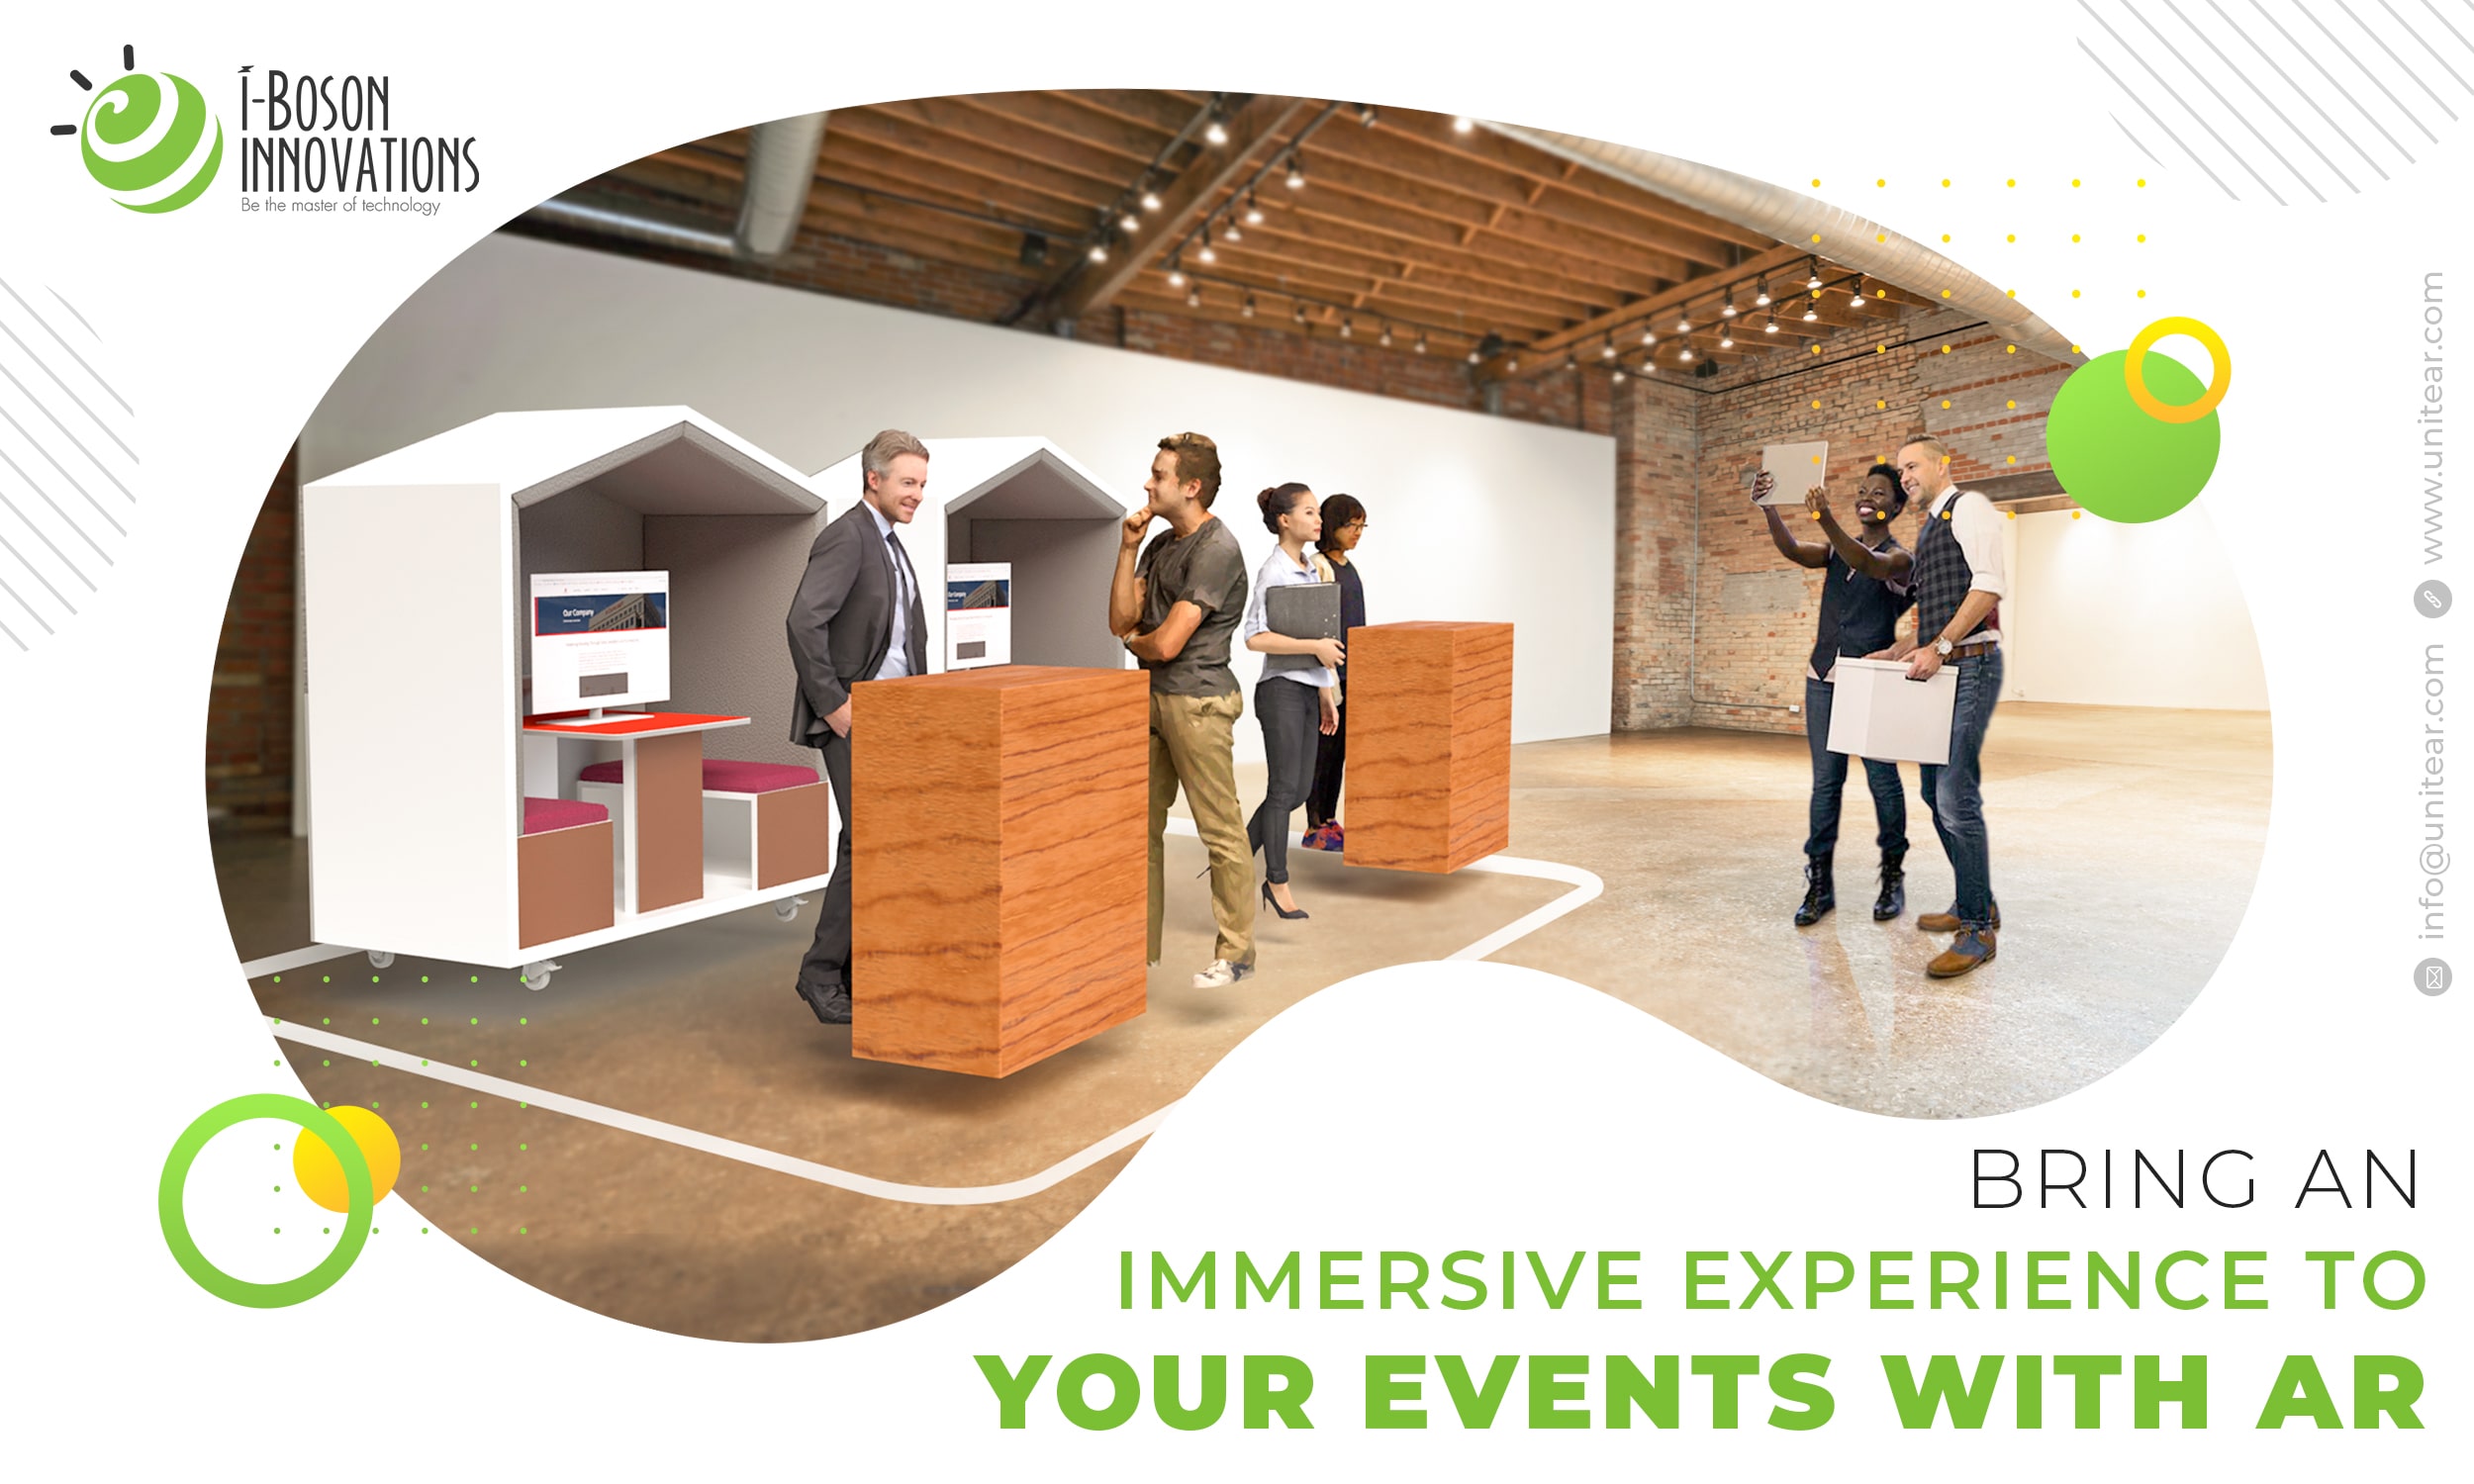 Bring an Immersive Experience to your Events with AR